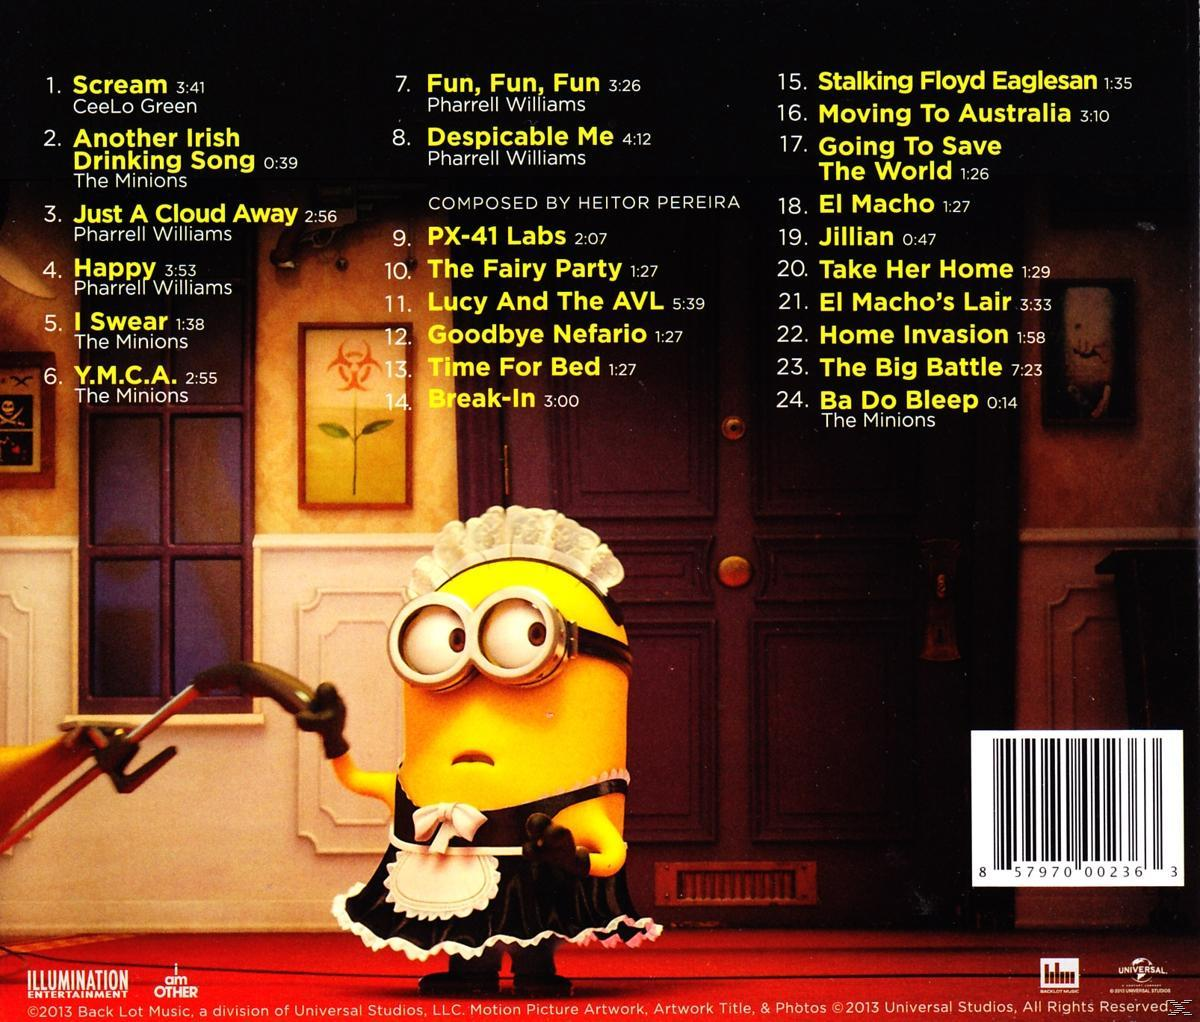 Pharrell Williams - (CD) Despicable - 2 Me